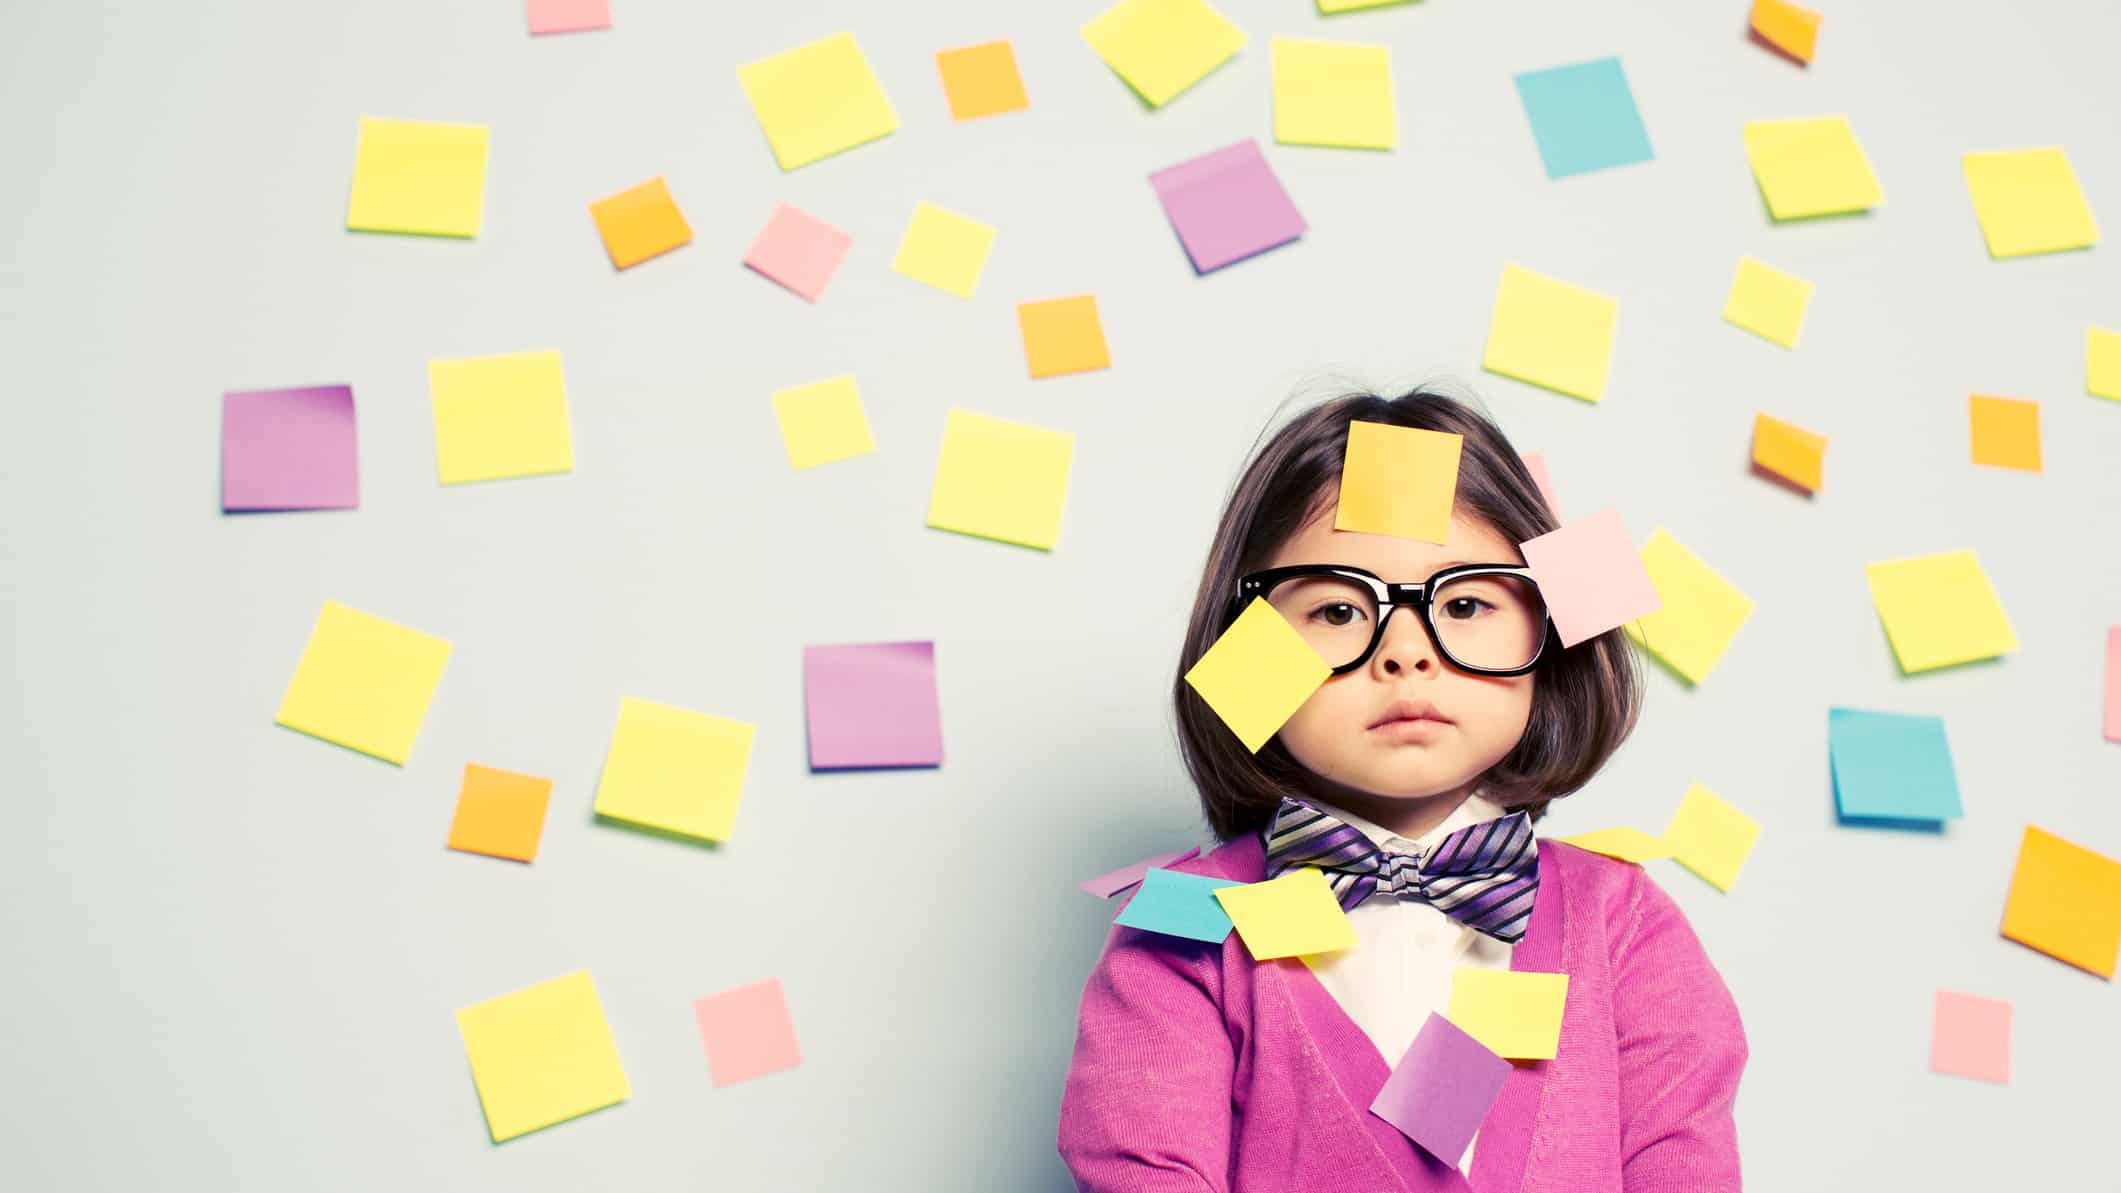 A young girl wearing glasses stares without smiling with lots of post-it notes stuck all over the wall behind her and all over her face.